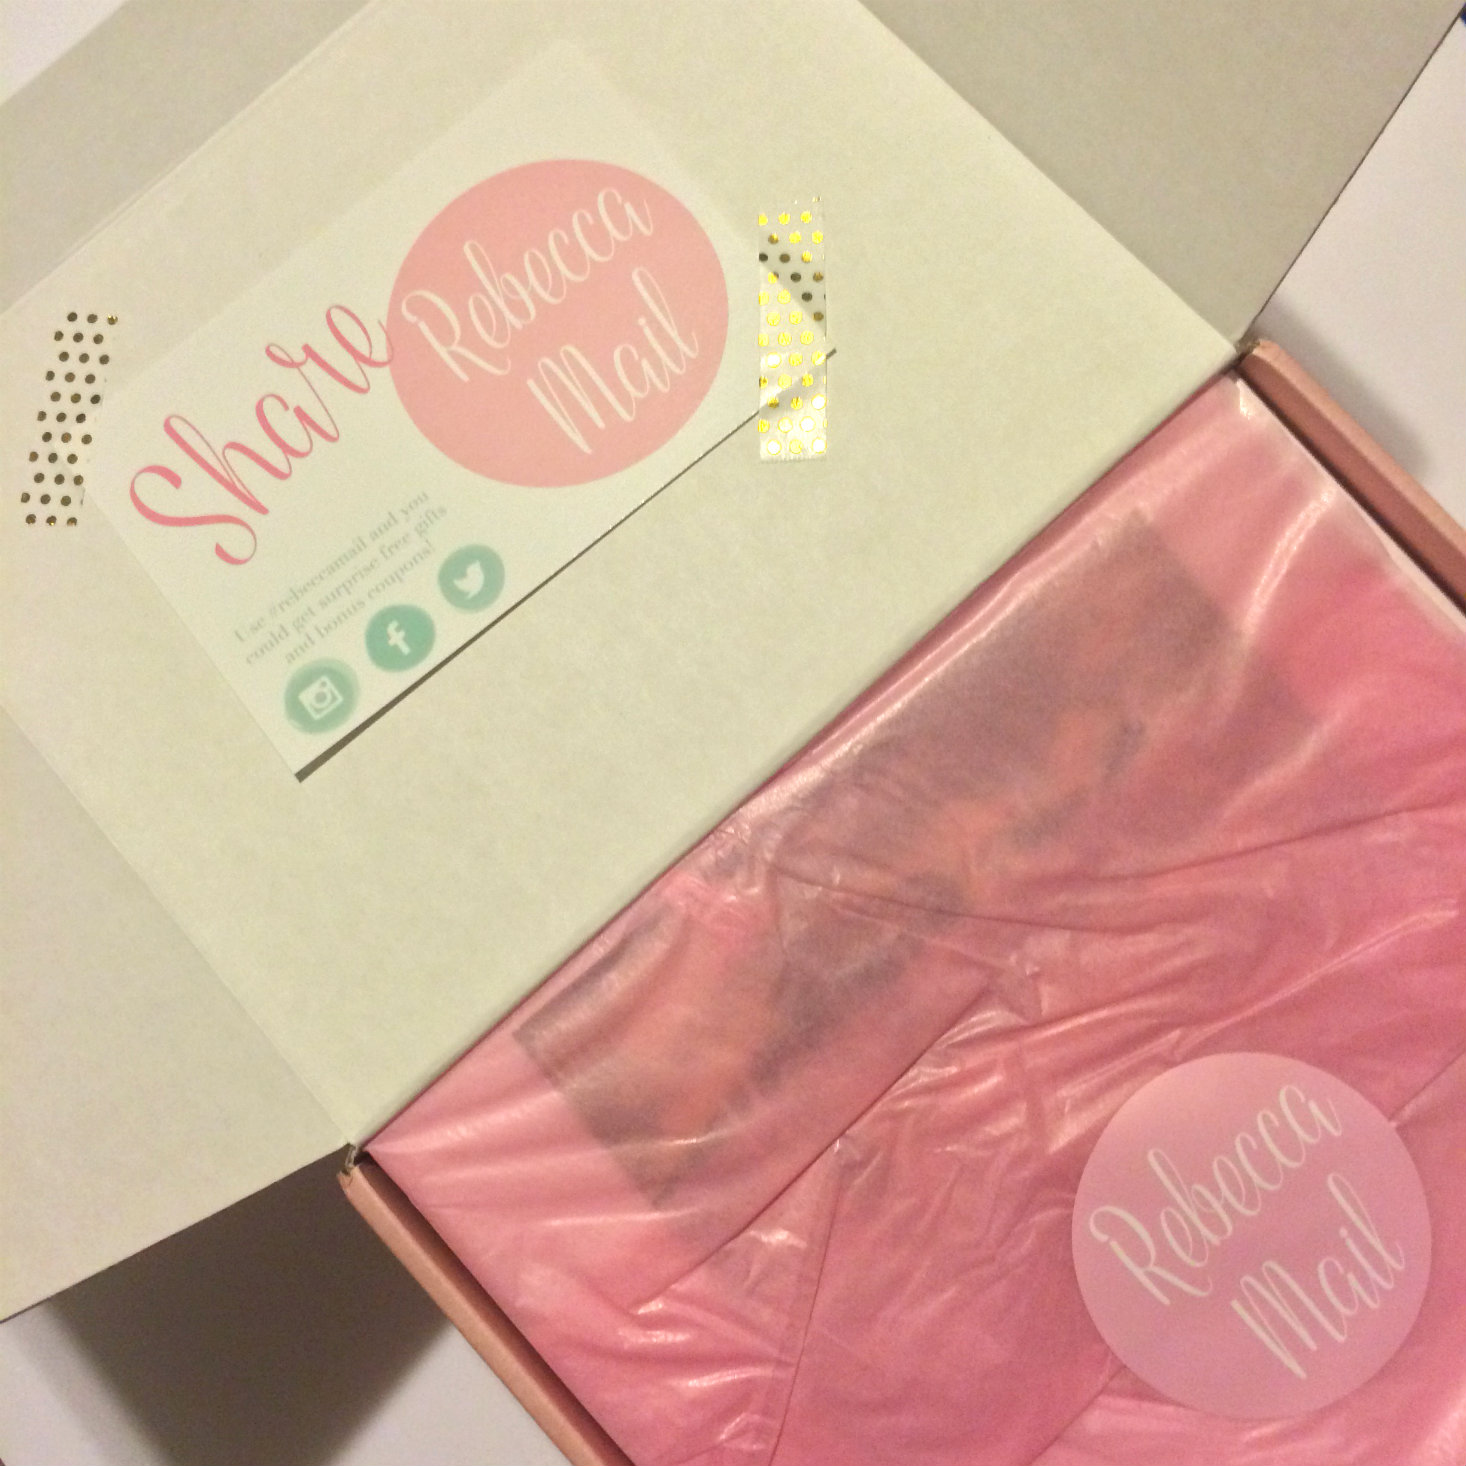 Meet RebeccaMail! Let's see what's inside this women's subscription box...